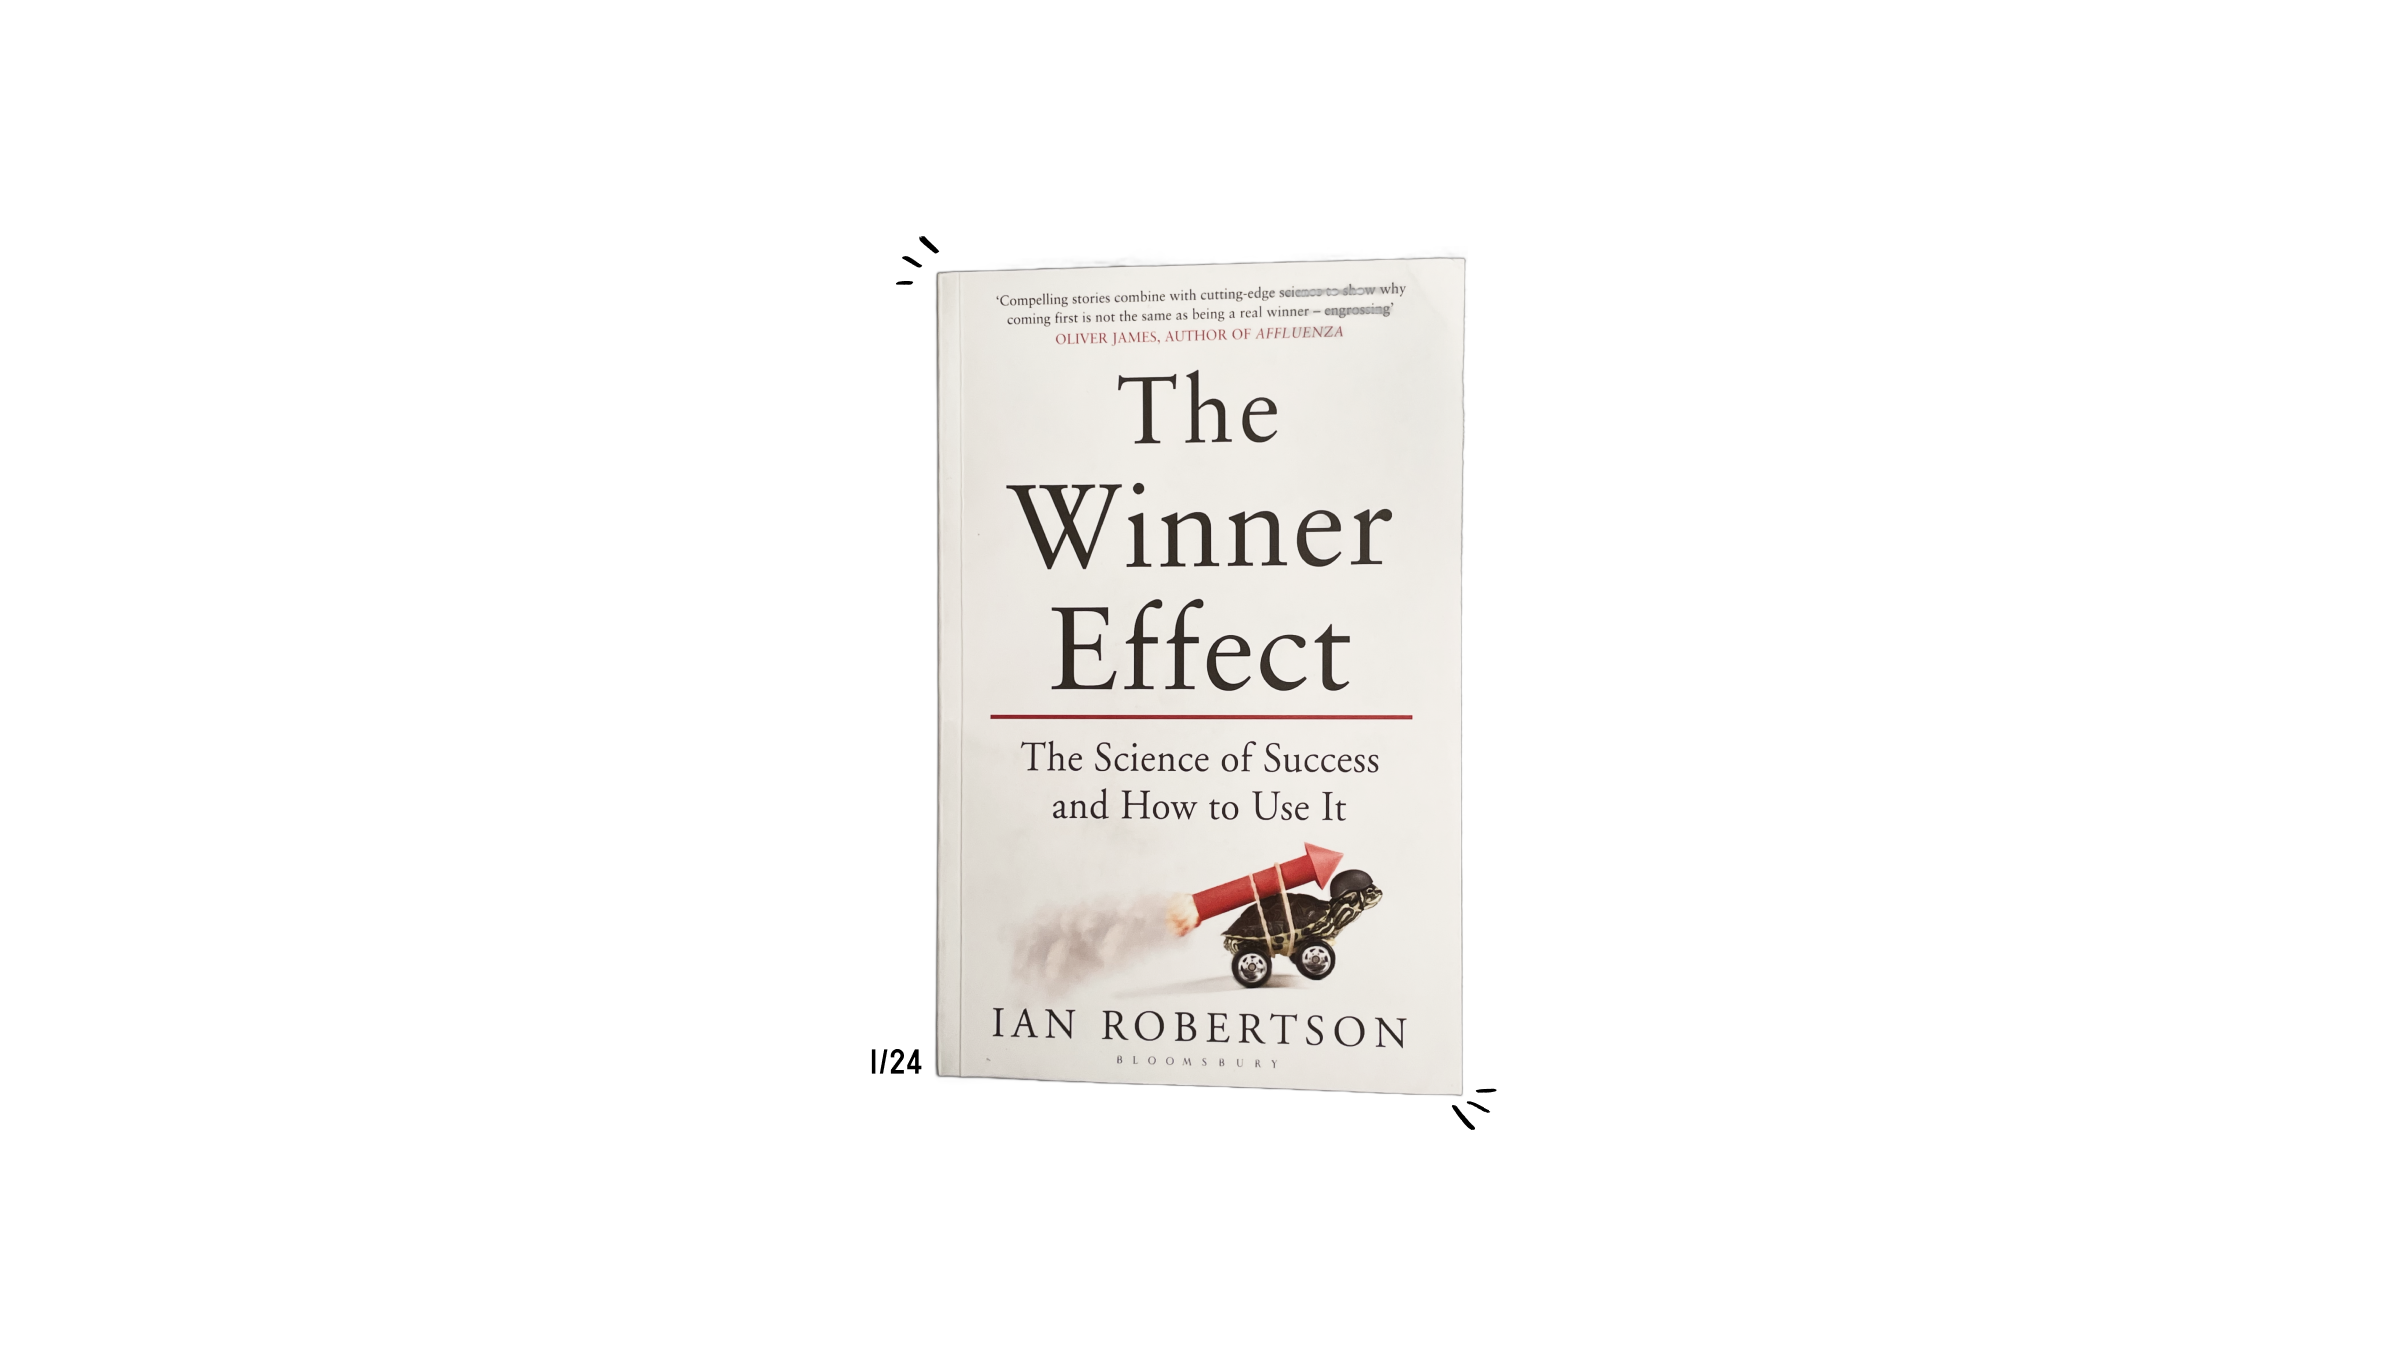 Transposed image of The Winner Effect by Ian H. Robertson